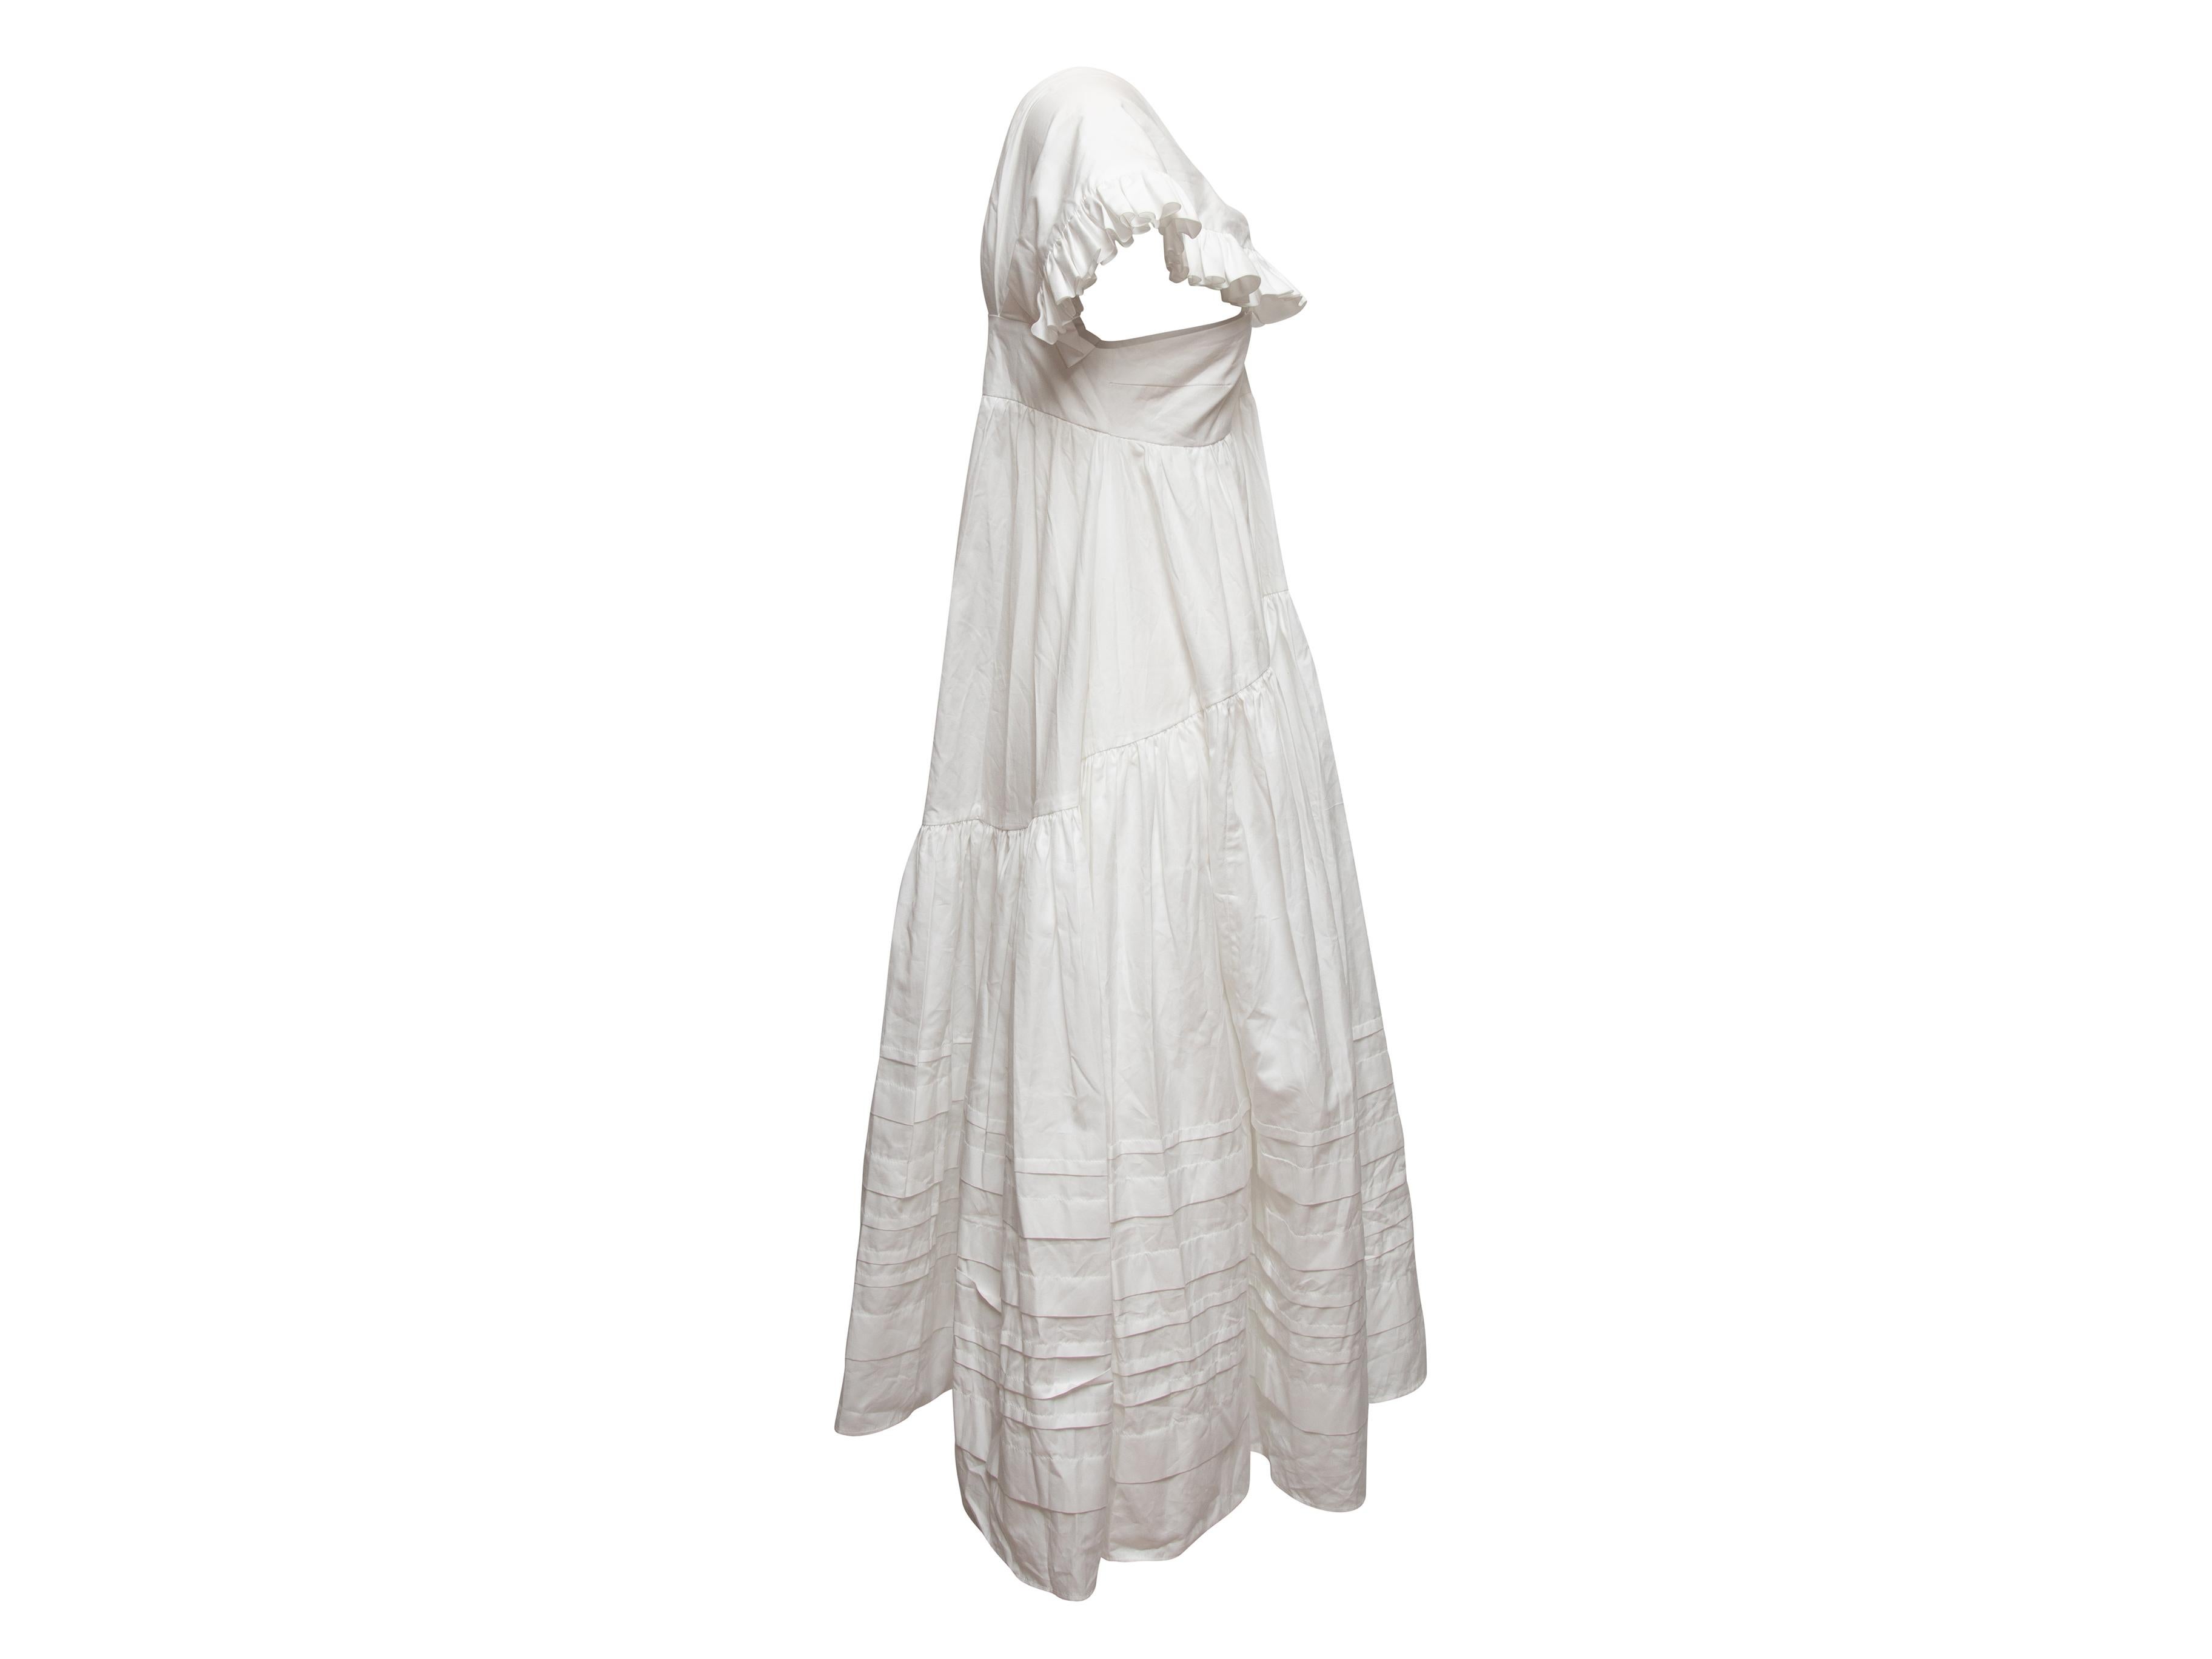 White cotton Rikke dress by Cecilie Bahnsen. From the Spring/Summer 2019 Collection. V-neck. Ruffle-trimmed short sleeves. Tiered skirt. 32